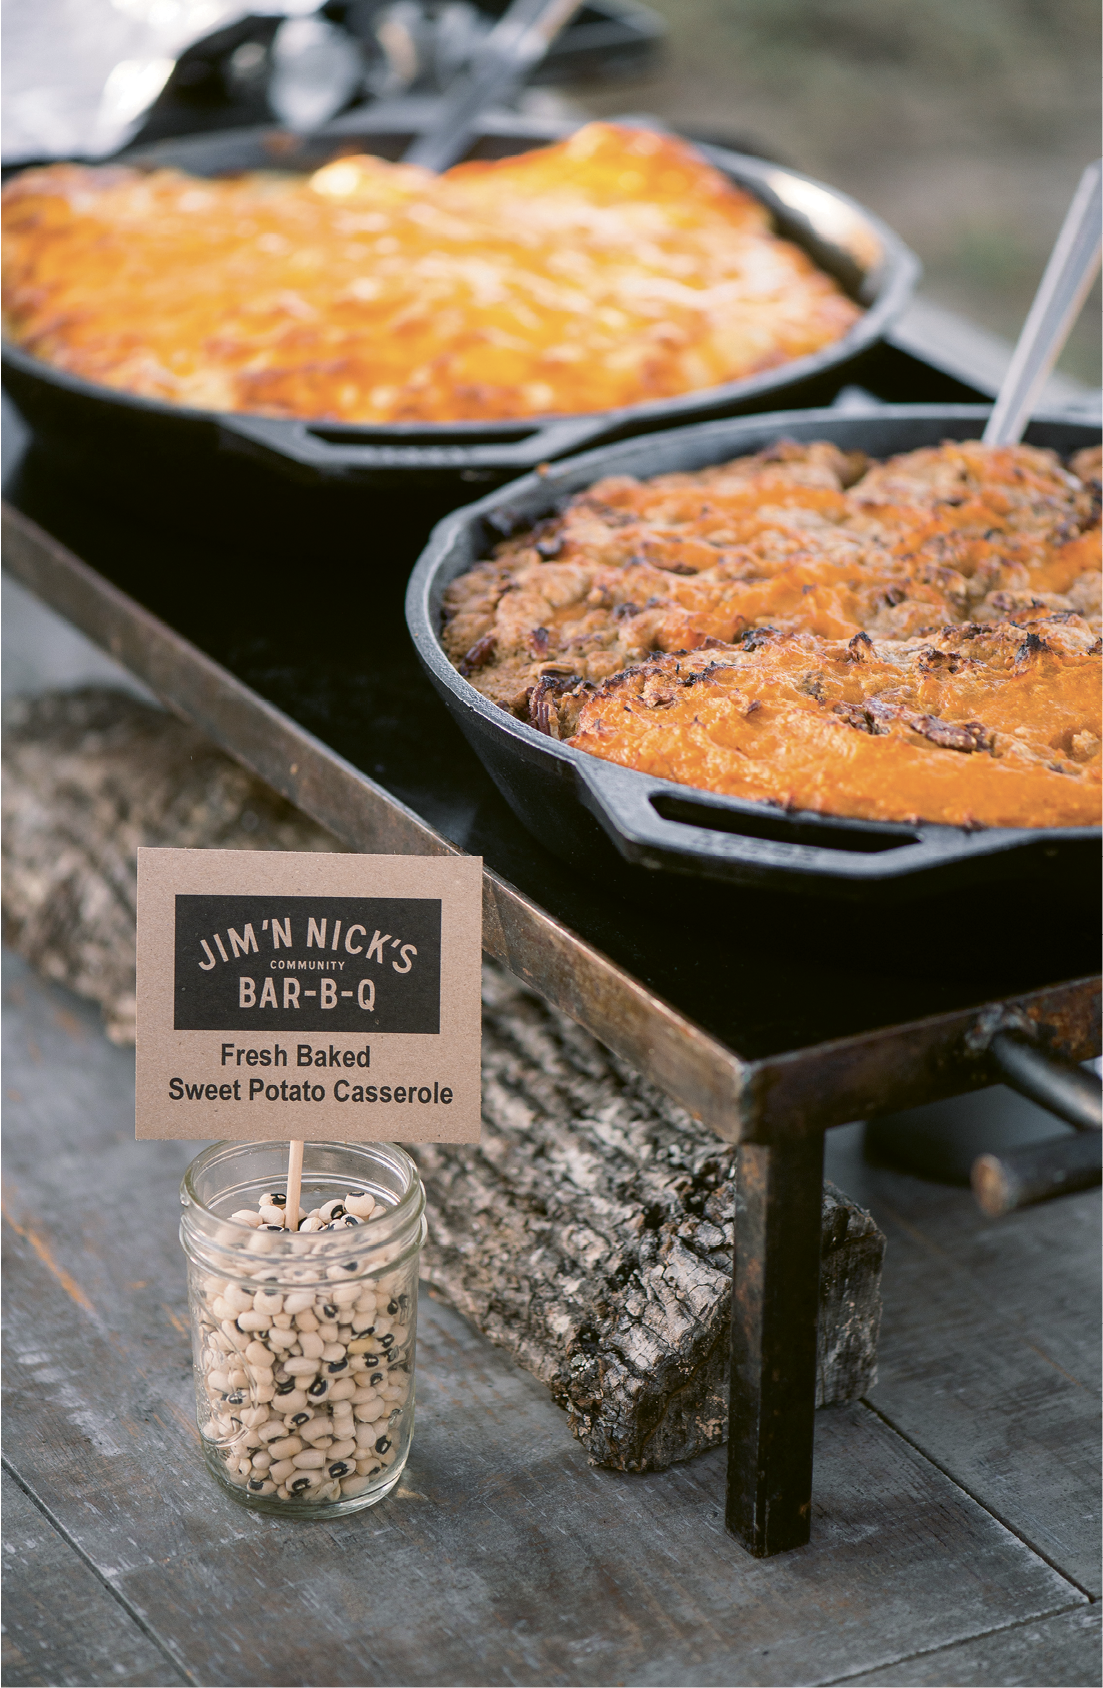 The cast-iron skillets and black-eyed pea menu markers on the buffet table fit right in with the event’s down-home vibe.